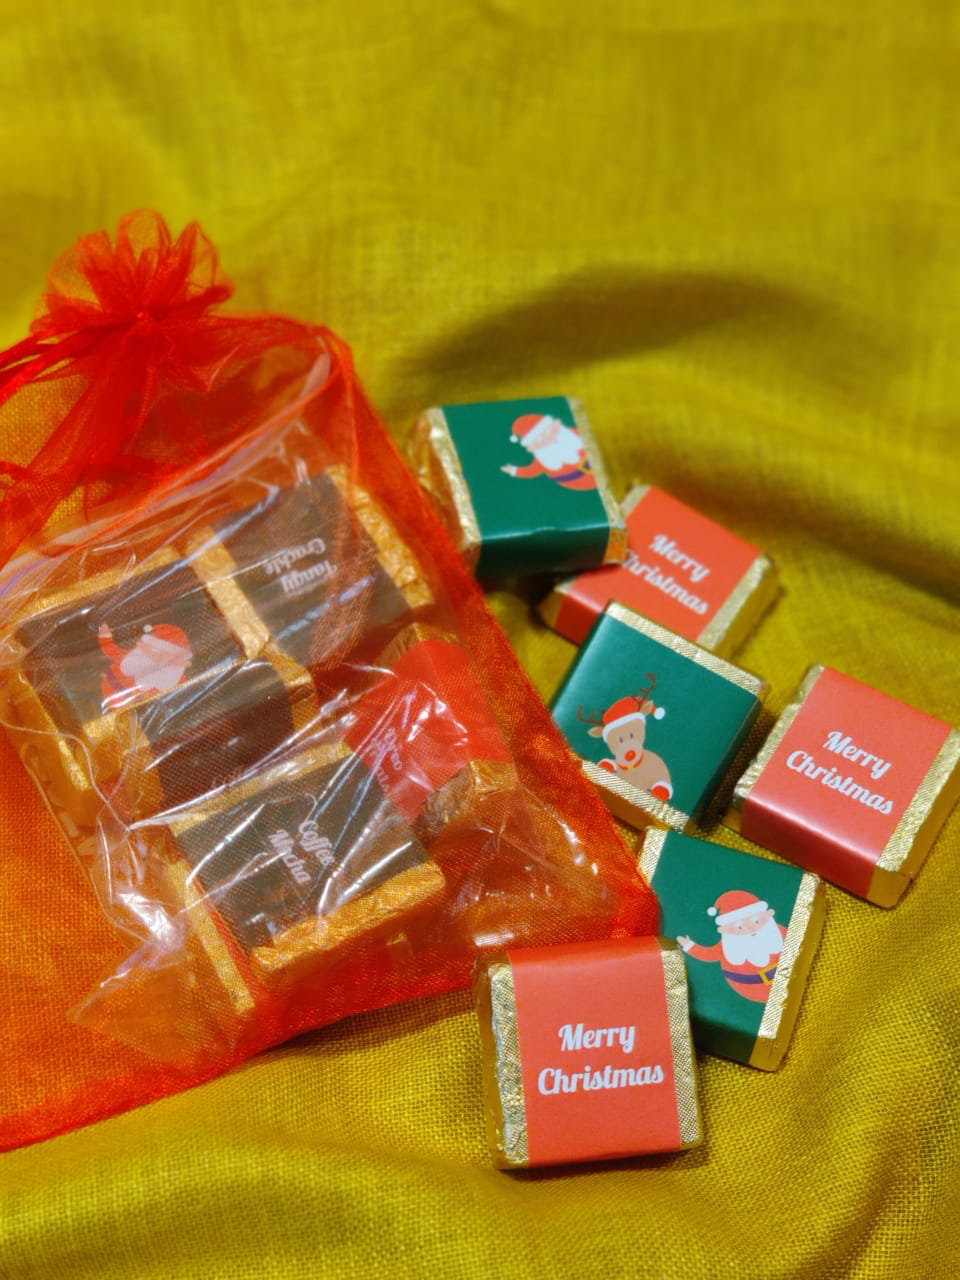 Customized Logo Chocolate Wrapper with Christmas and New Year Greeting Message 6 Chocolate Combo Gift Set - For Employees, Dealers, Customers, Stakeholders, Personal or Corporate Christmas and New Year Gifting